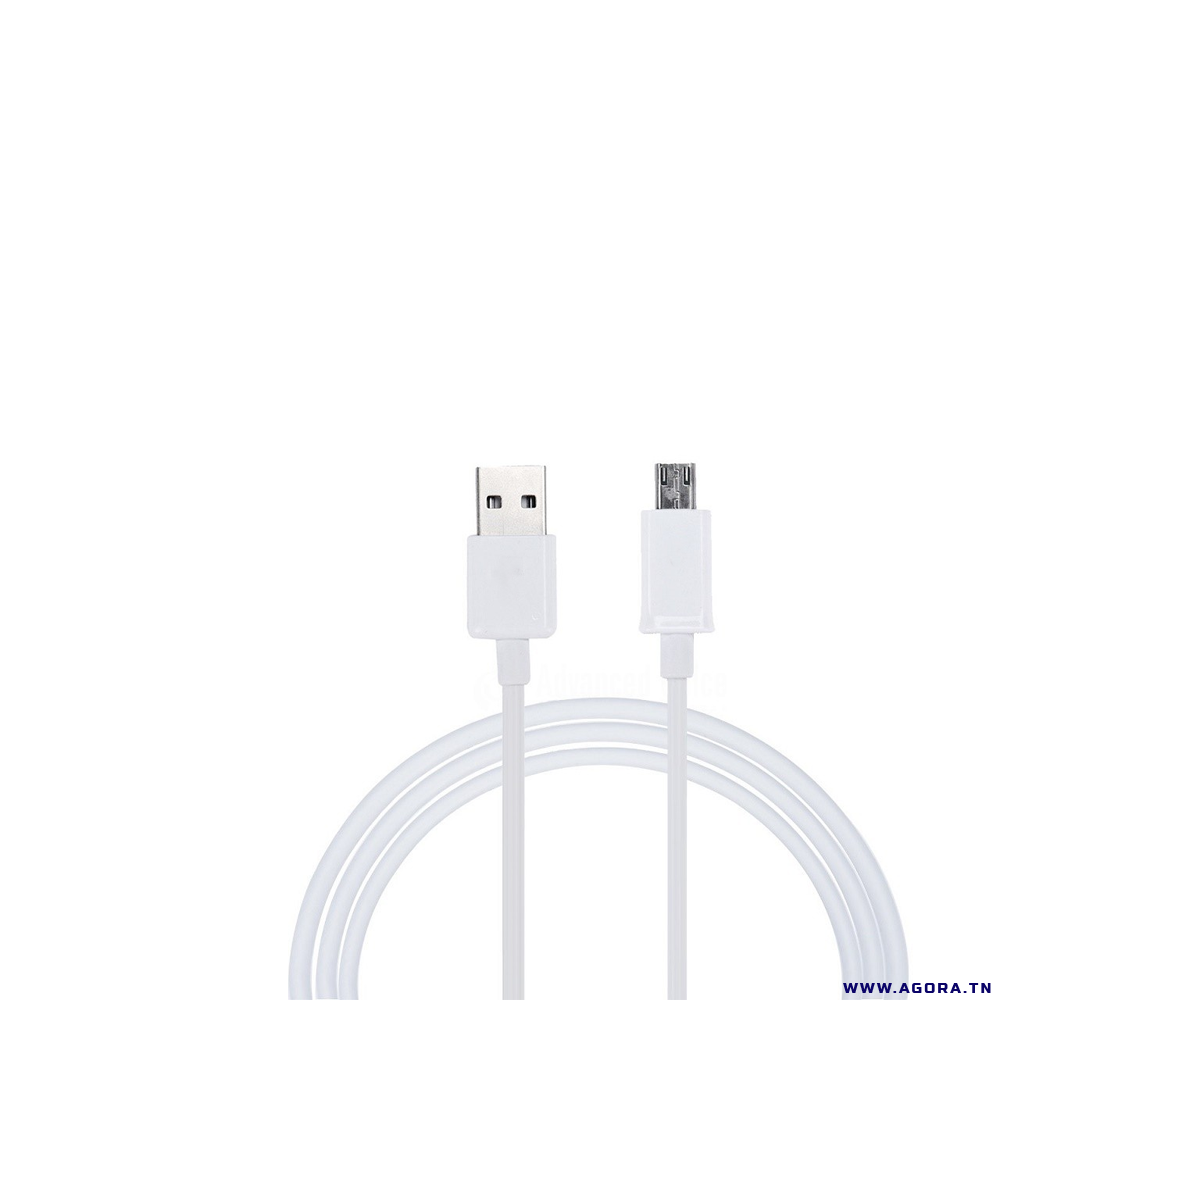 CABLE USB POUR ANDROID V8 1M | Agora.tn